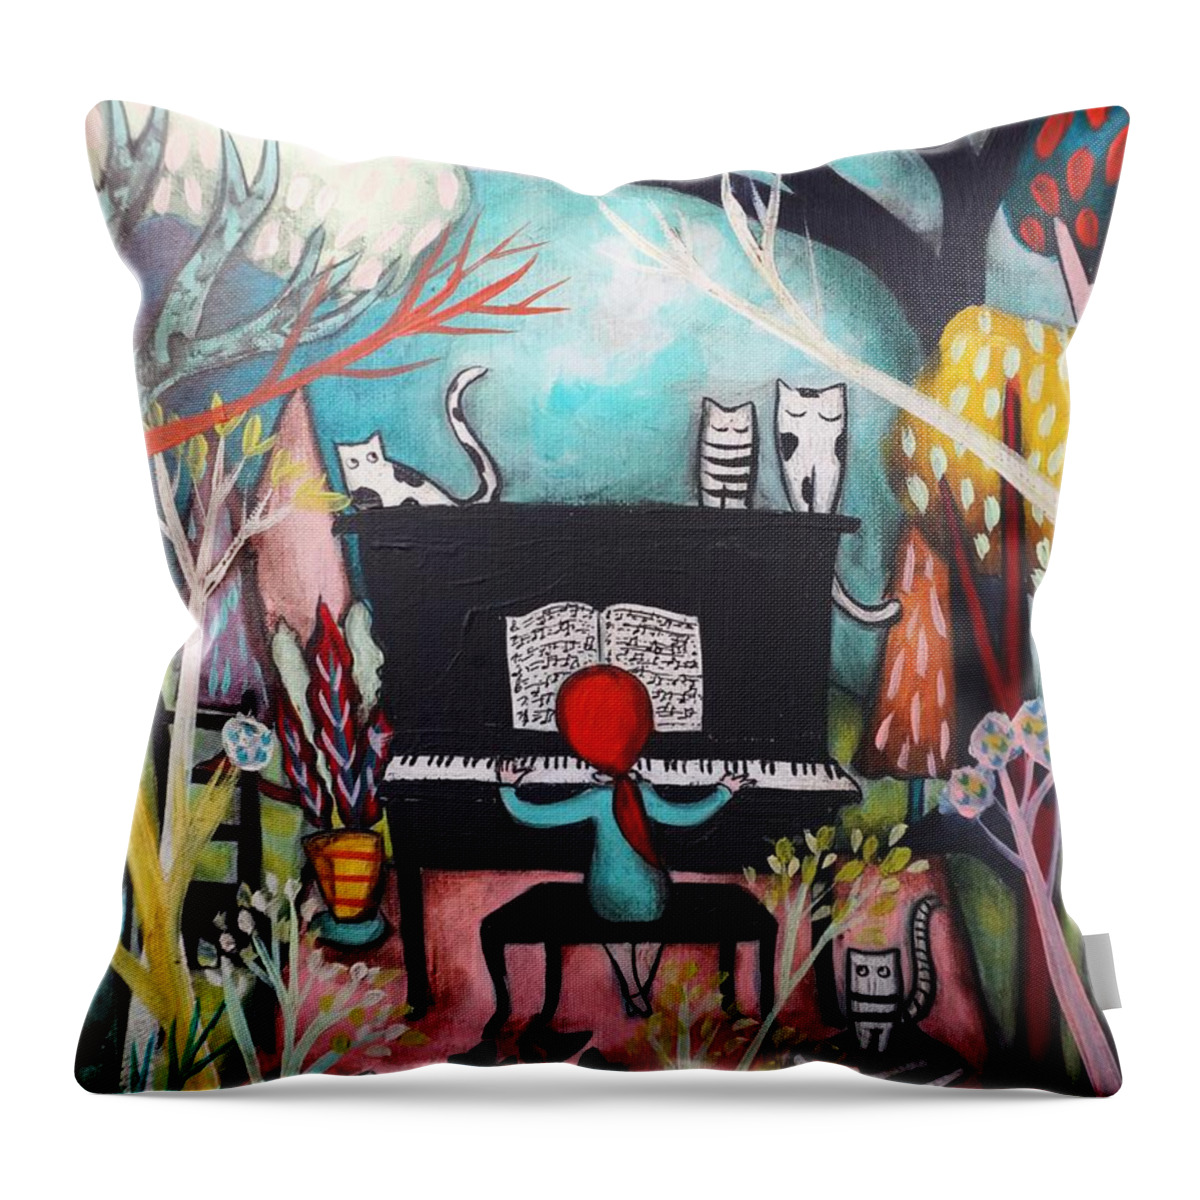 Piano Throw Pillow featuring the painting Every Good Boy Does Fine Always by Chris Jeanguenat